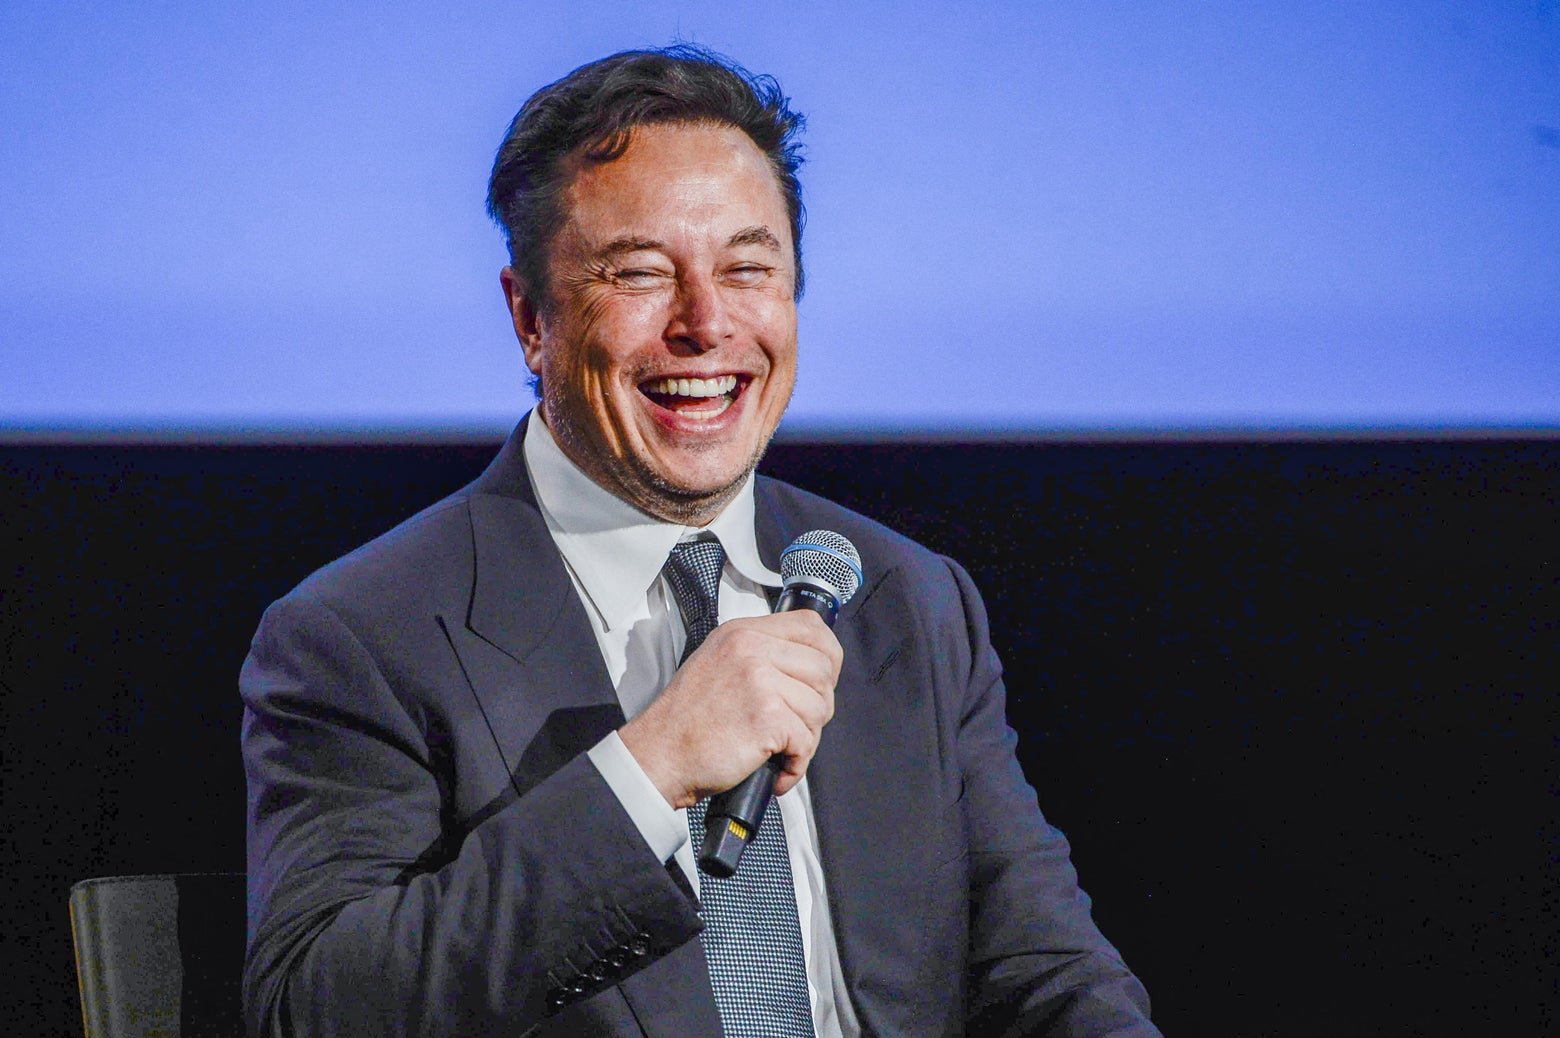 Elon Musk Only Has “Yes” Men